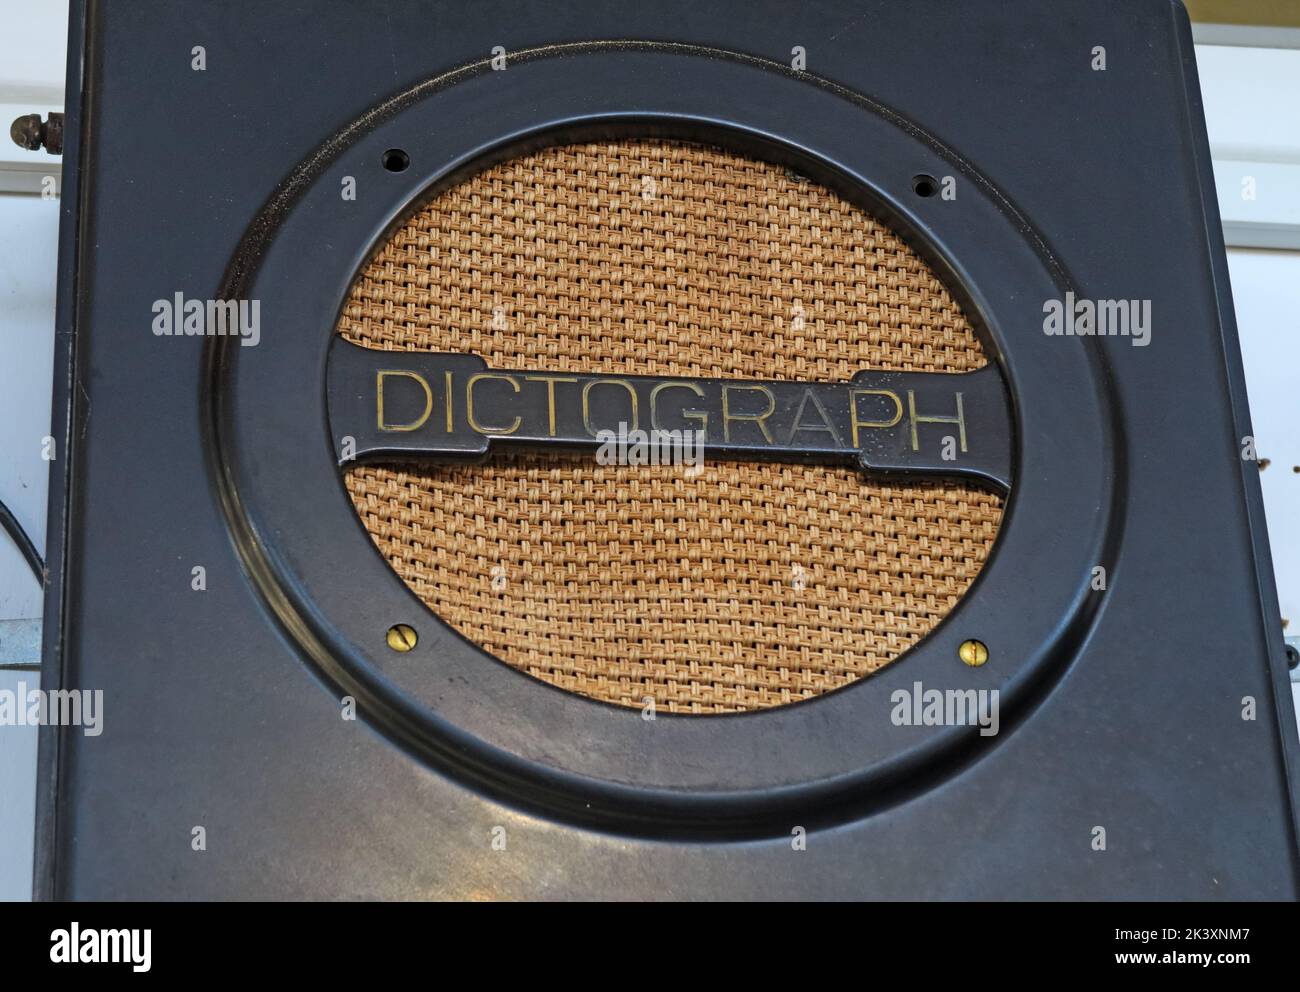 Dictograph army loudspeaker speaker system Stock Photo